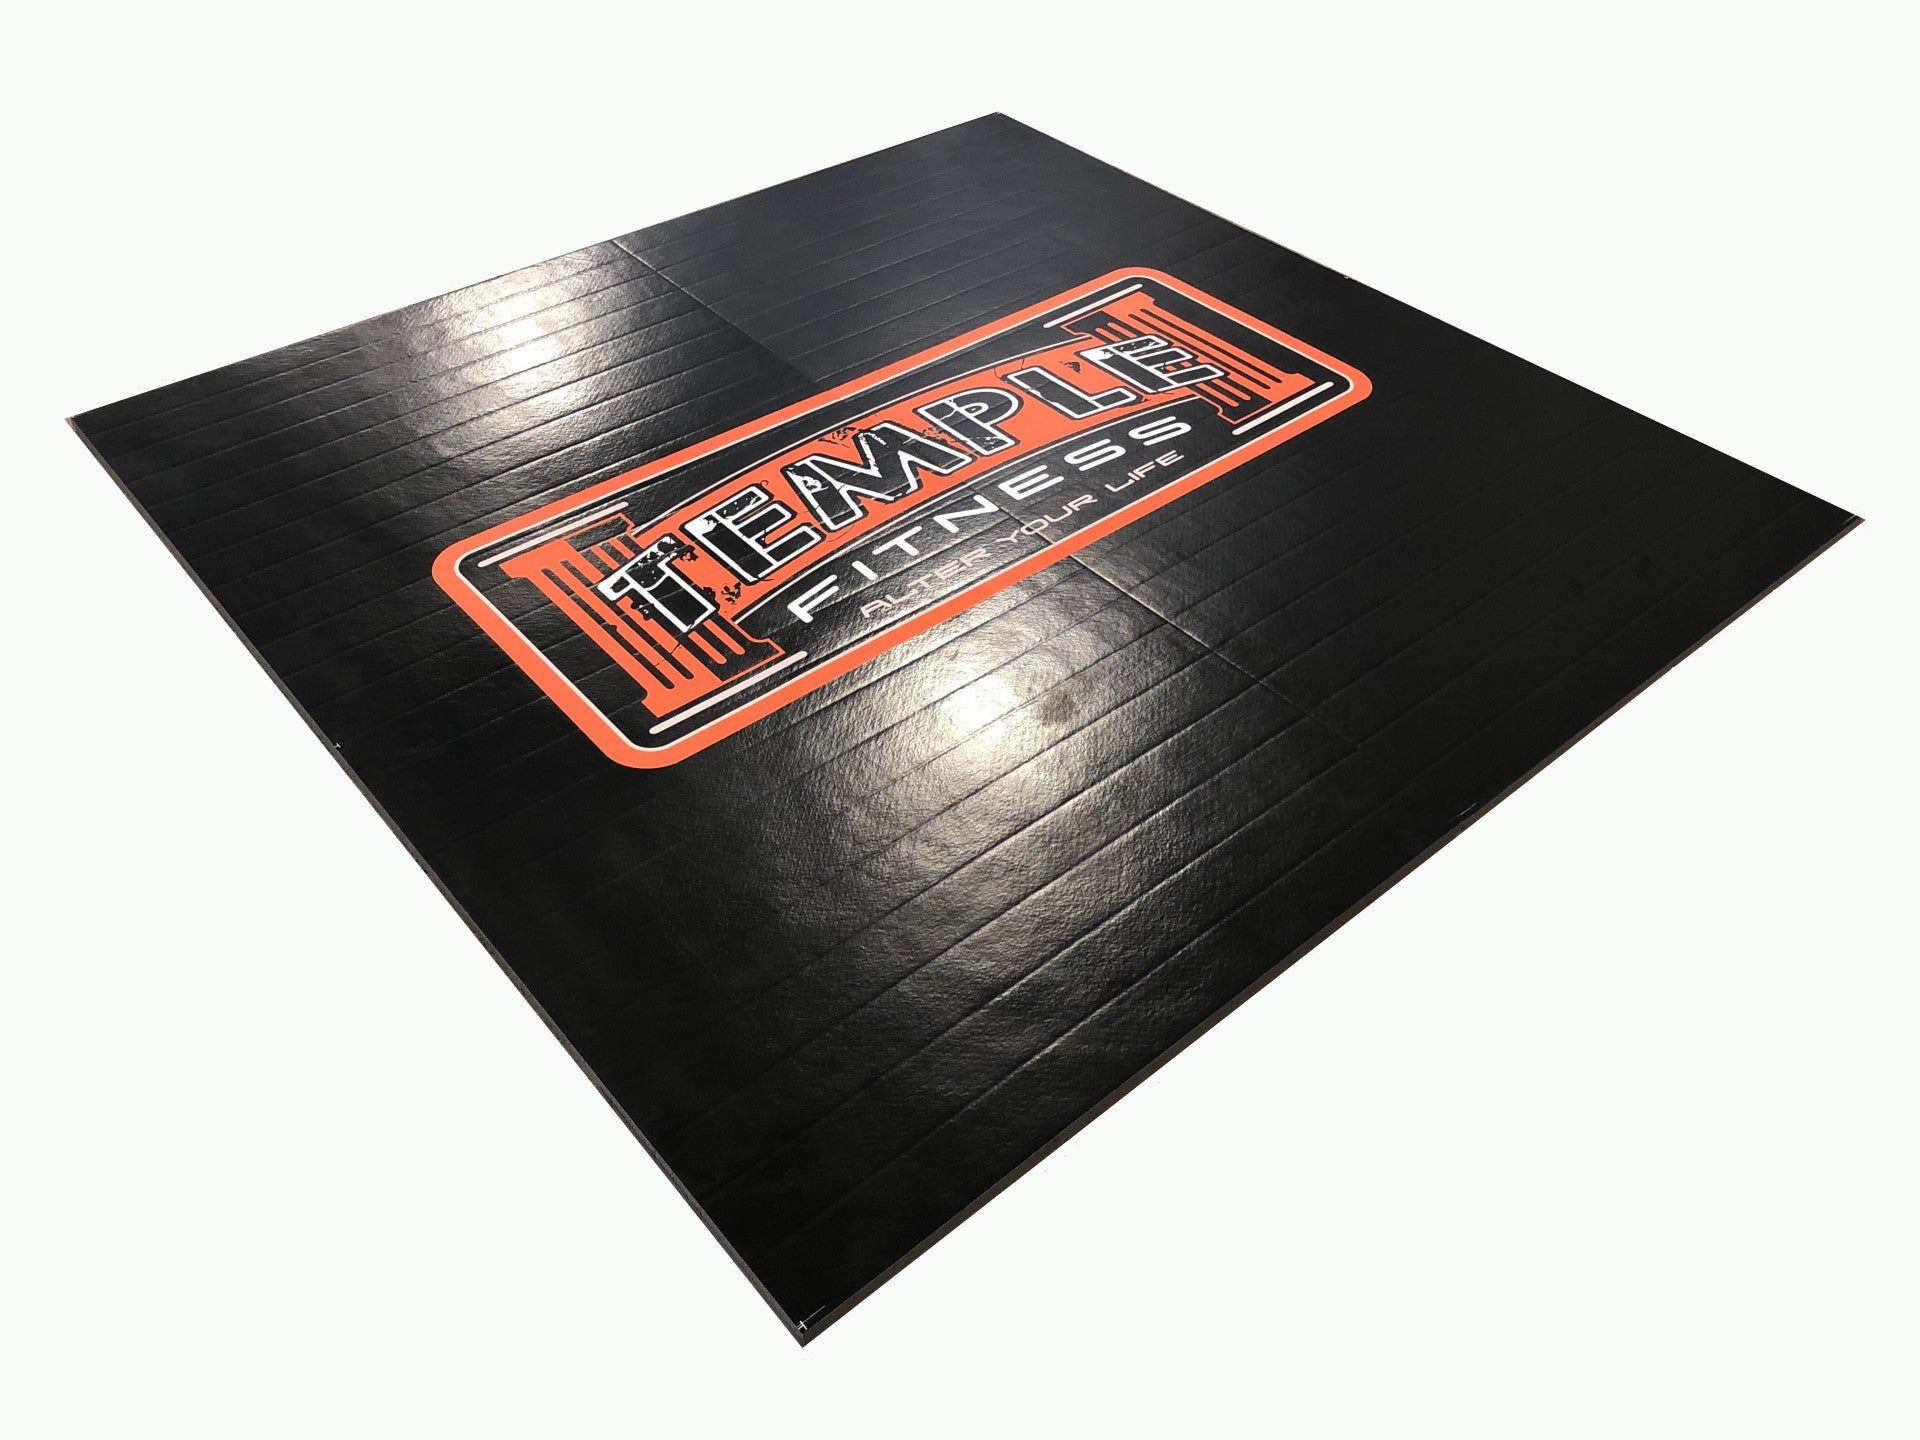 Your Design Digitally Printed 10' x 10' x 1 3/8" Roll-Up Wrestling Mat